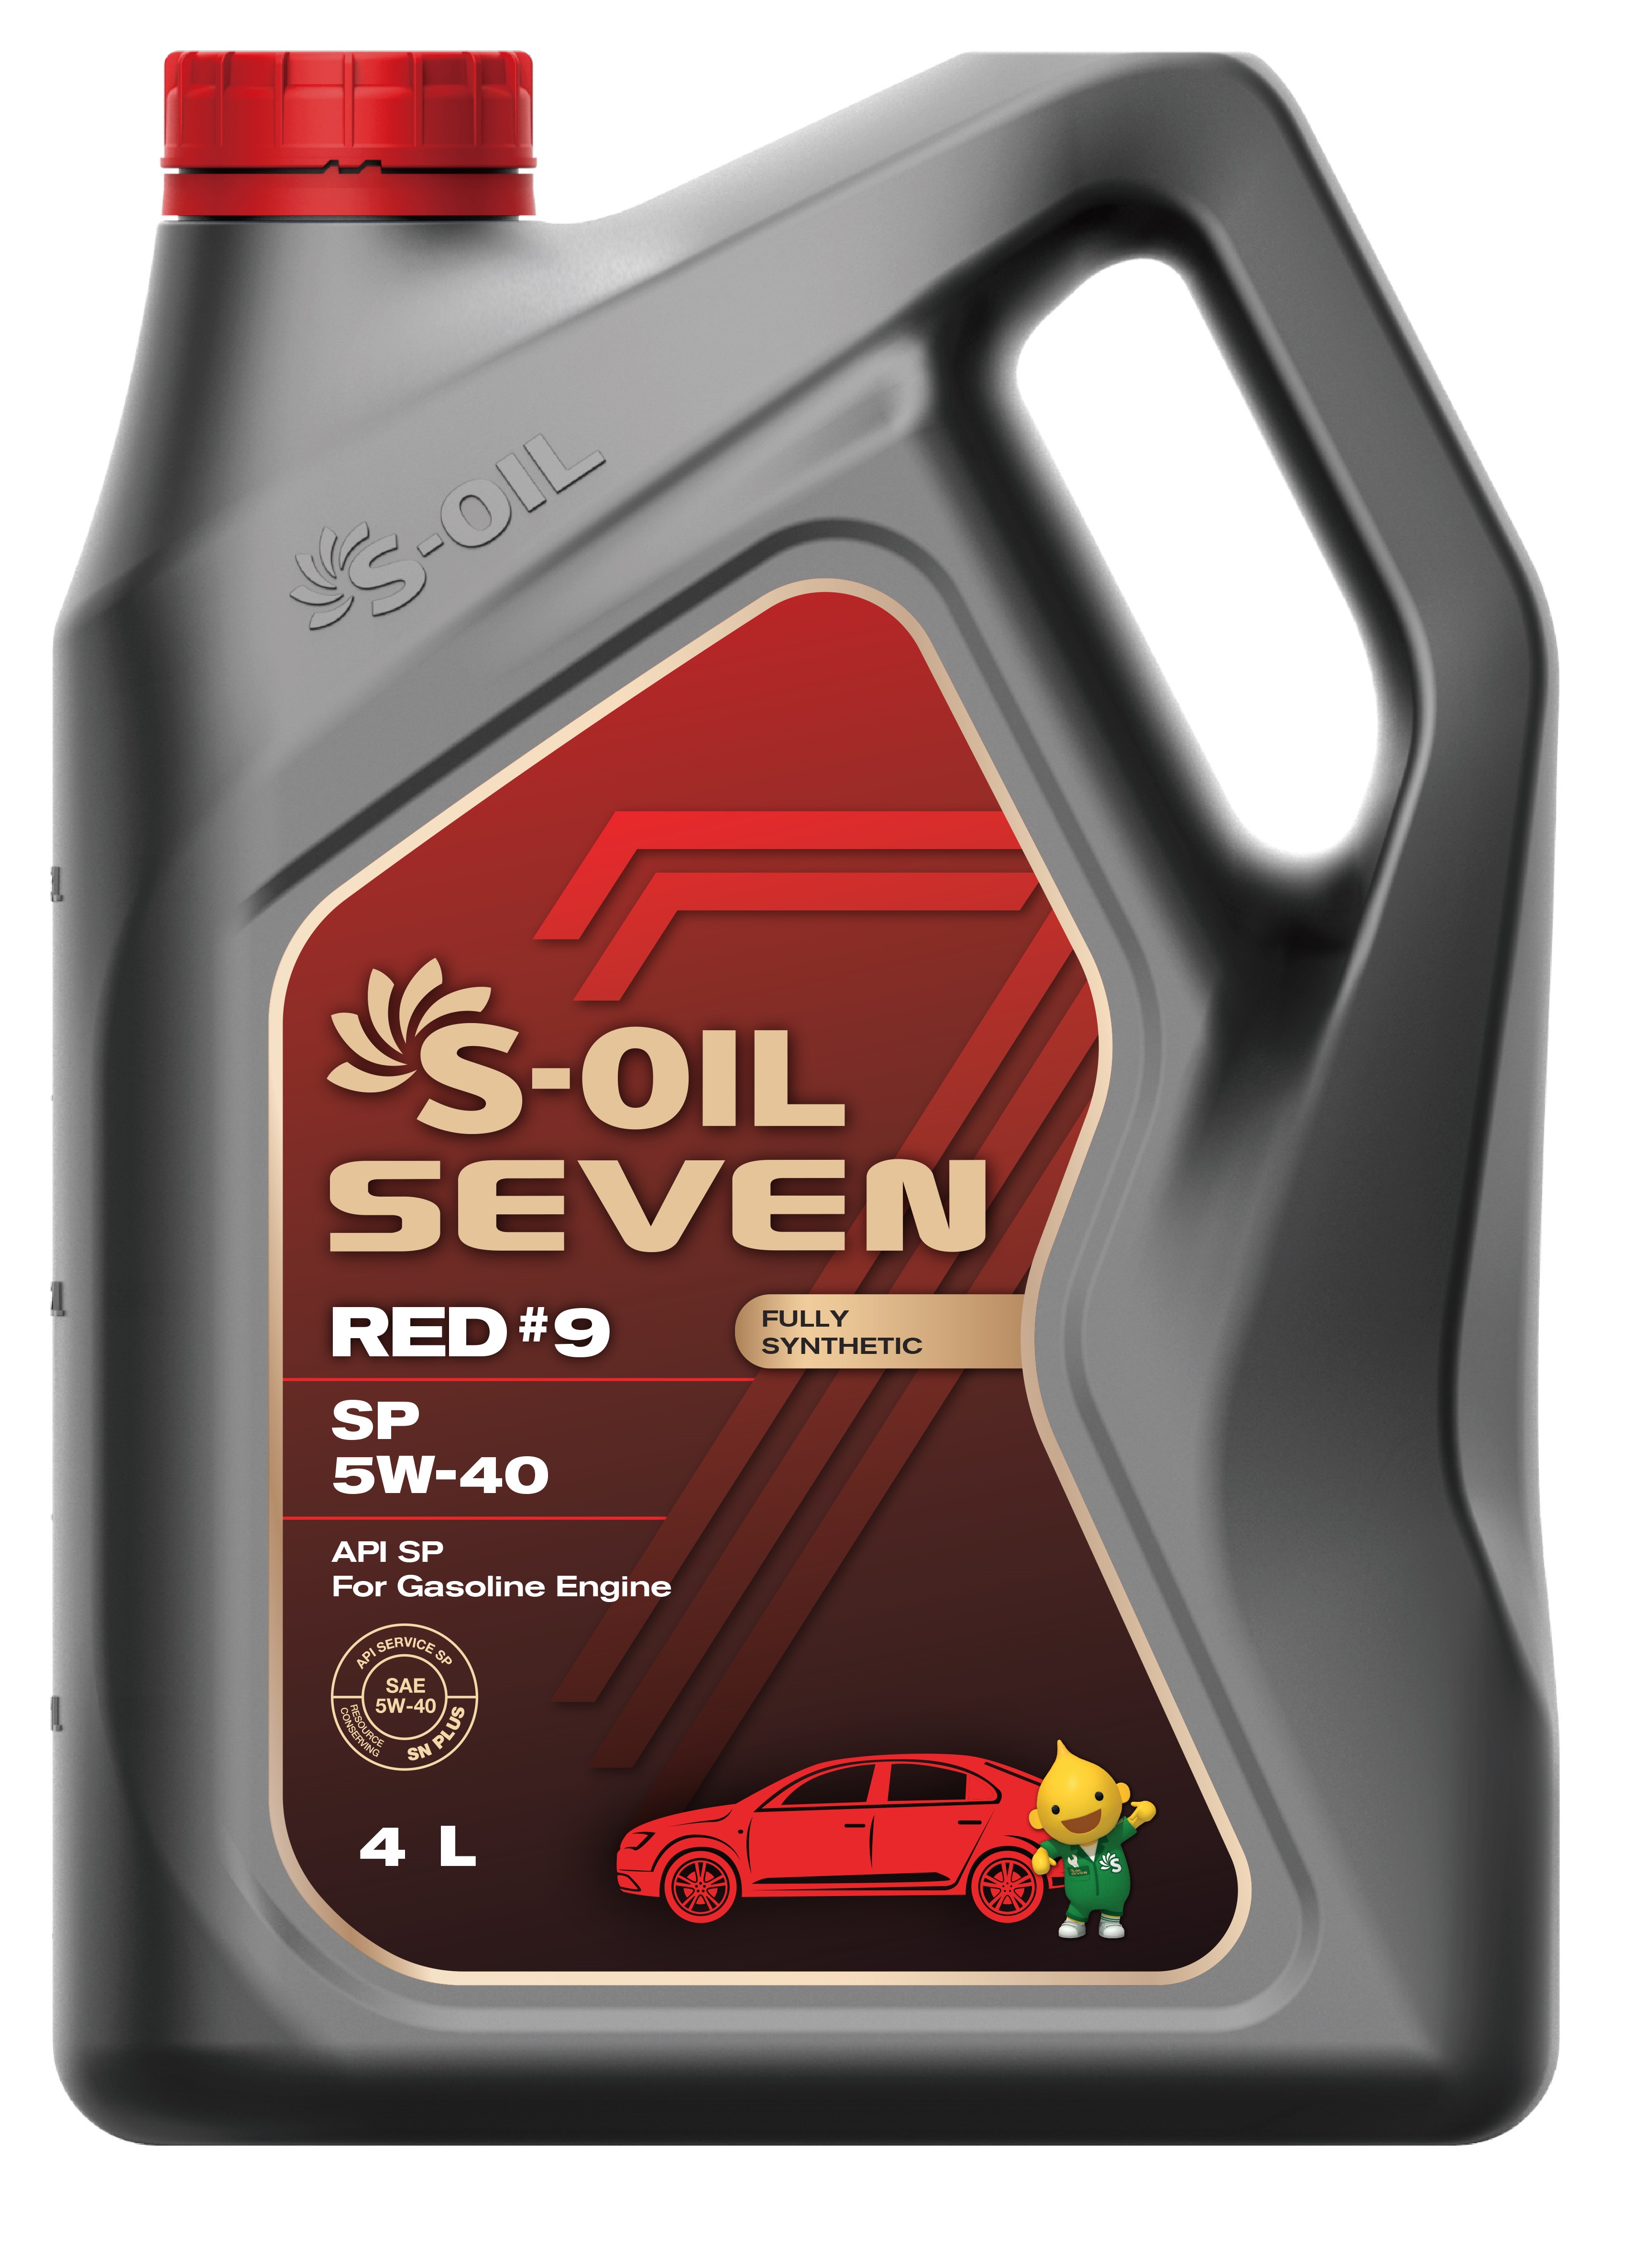 S-OIL 7 RED #9 5W-40 SP 4л